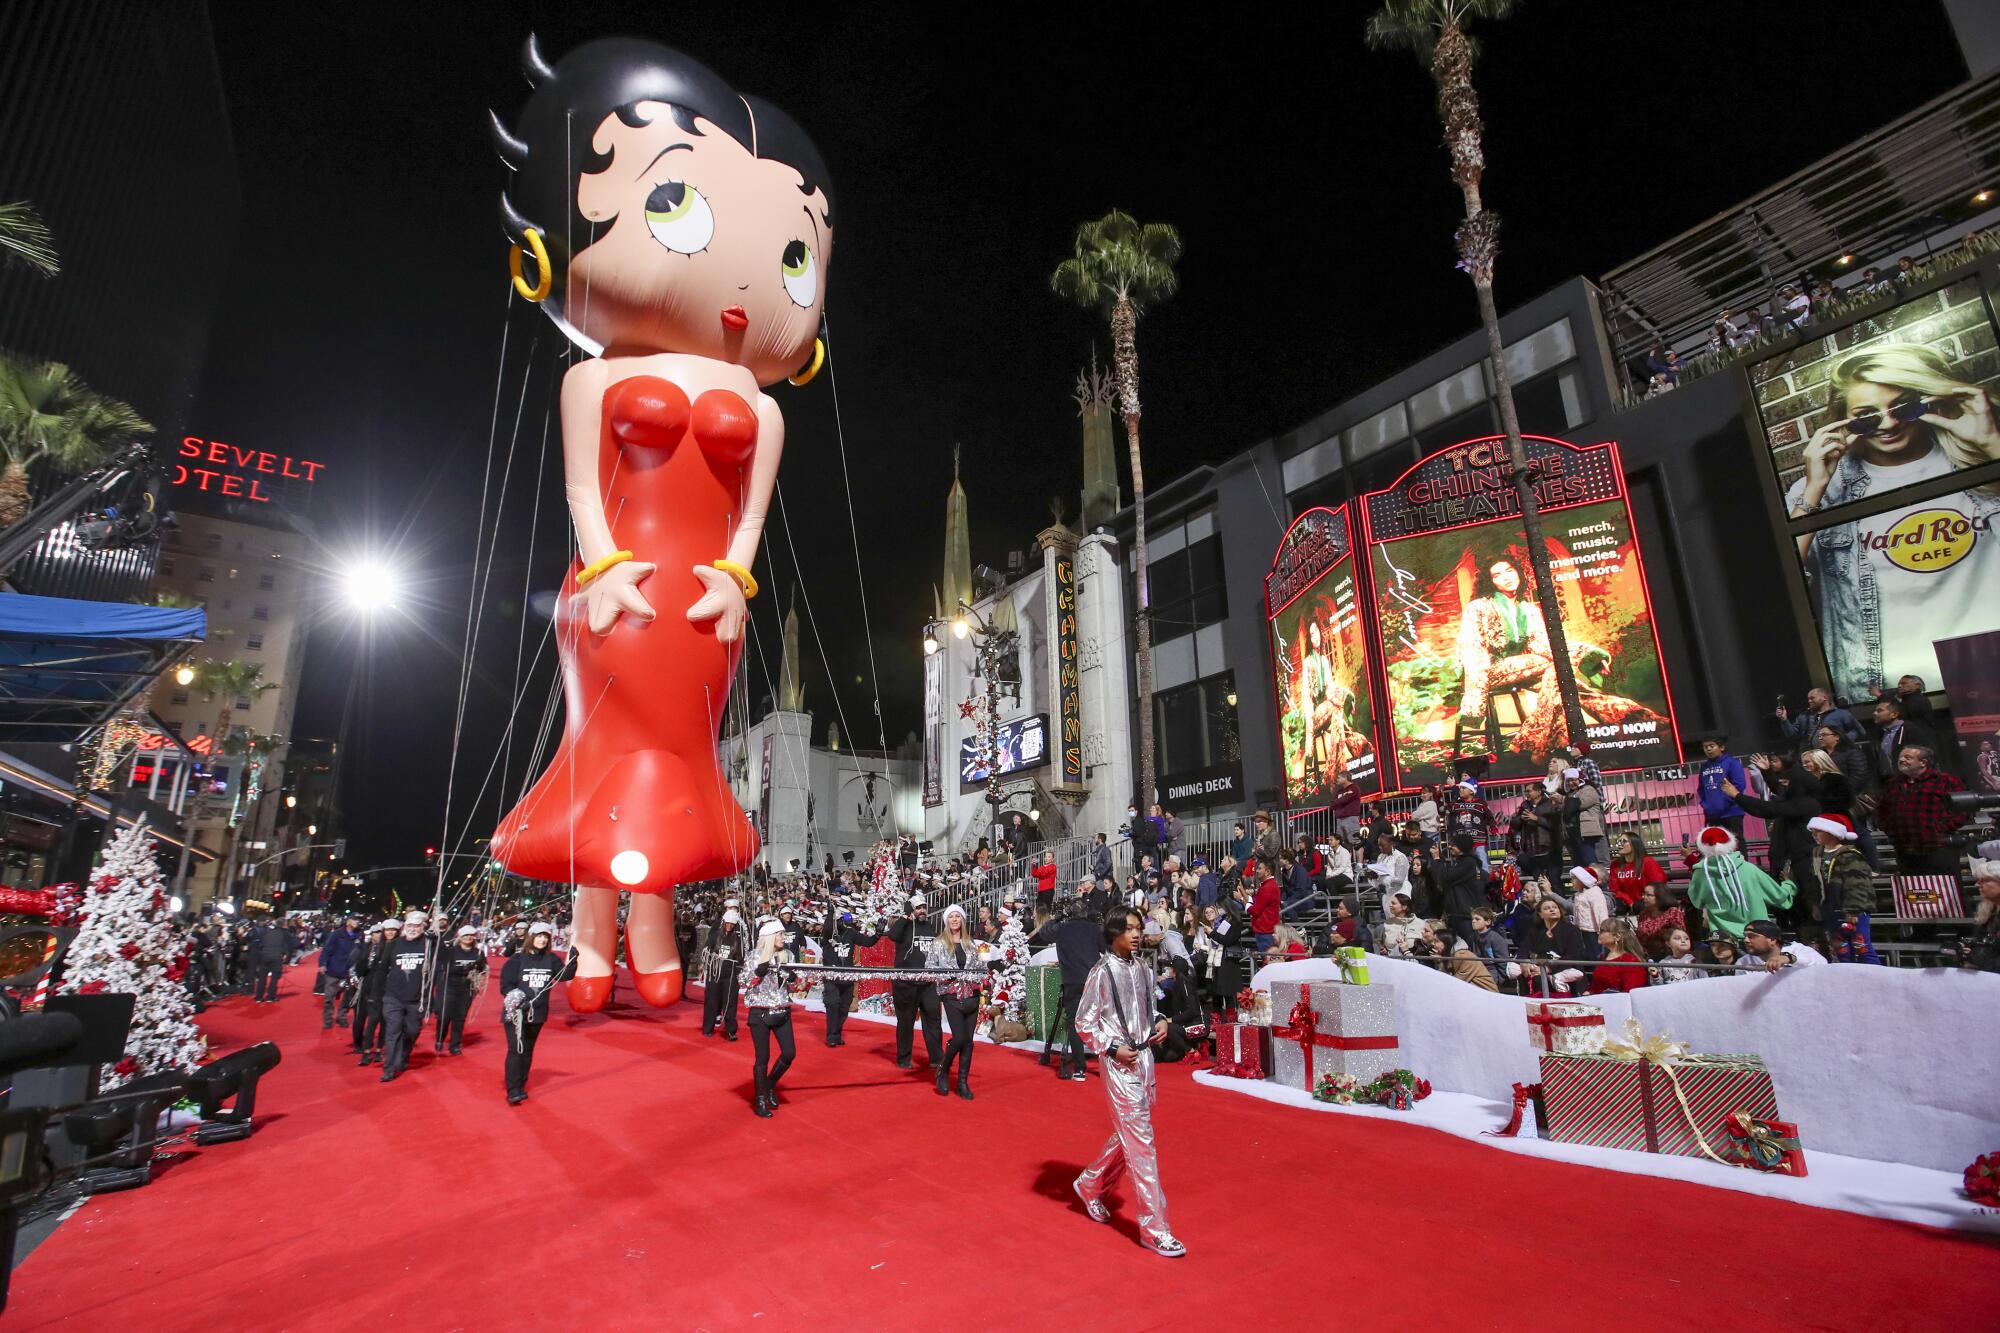 A giant Betty Boop balloon is wrangled during the Hollywood Christmas Parade